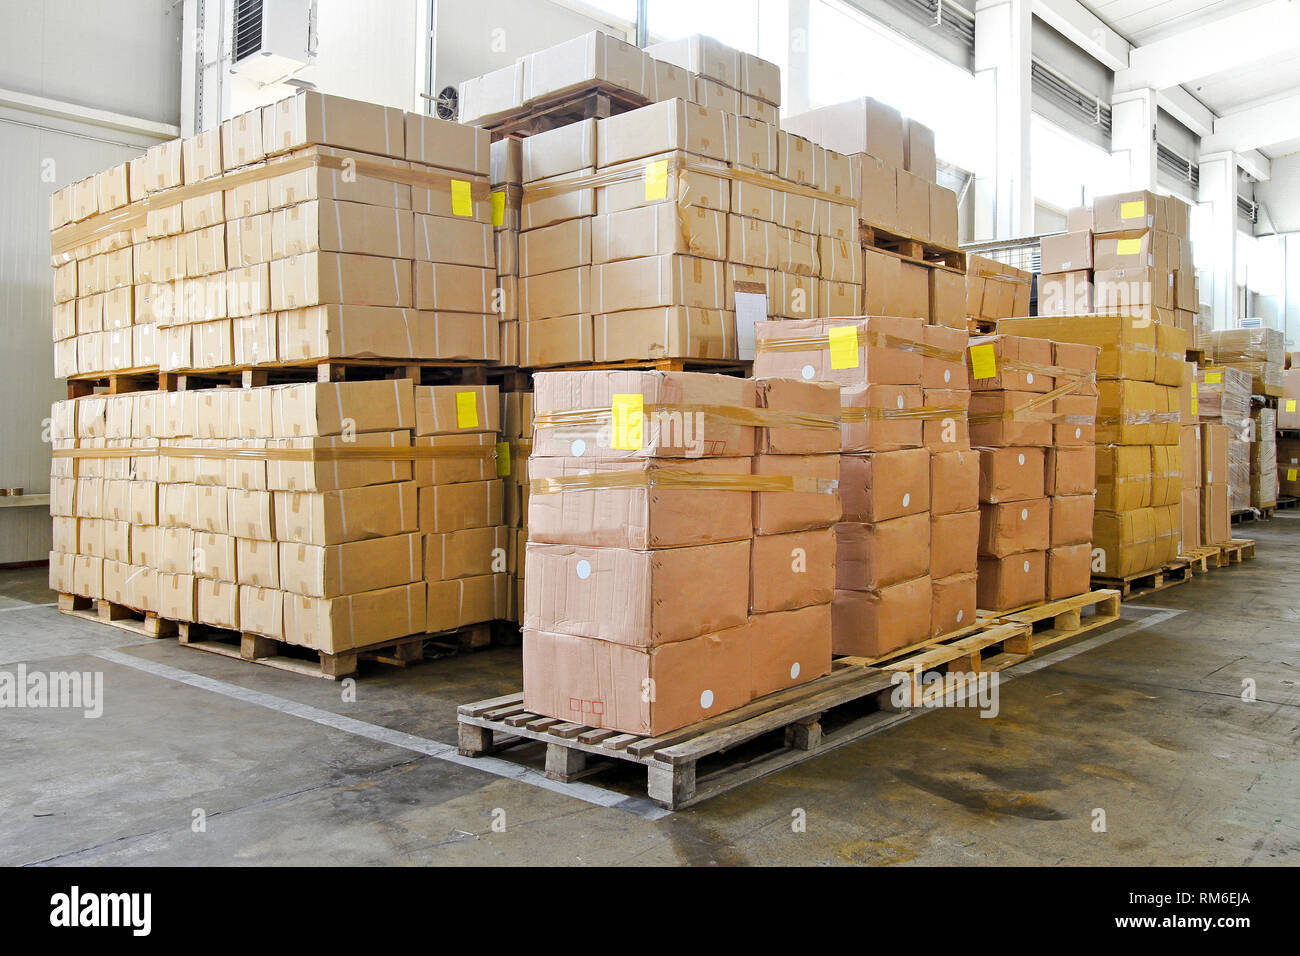 Big pile of boxes in distribution warehouse Stock Photo - Alamy